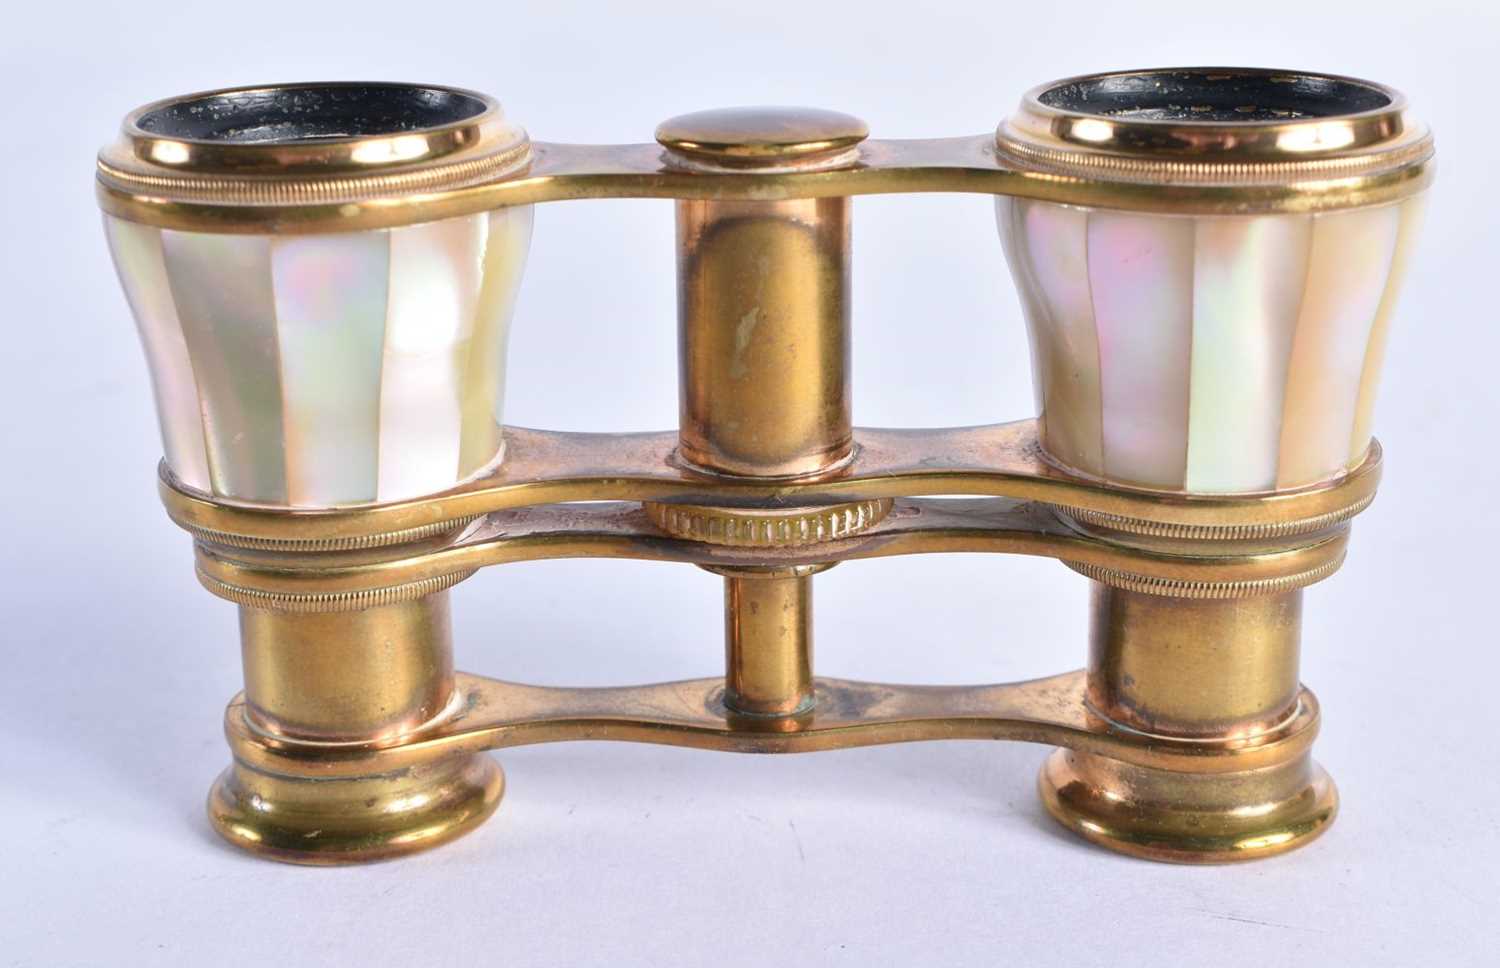 A PAIR OF MOTHER OF PEARL OPERA GLASSES 5.5 x 9.5cm extended